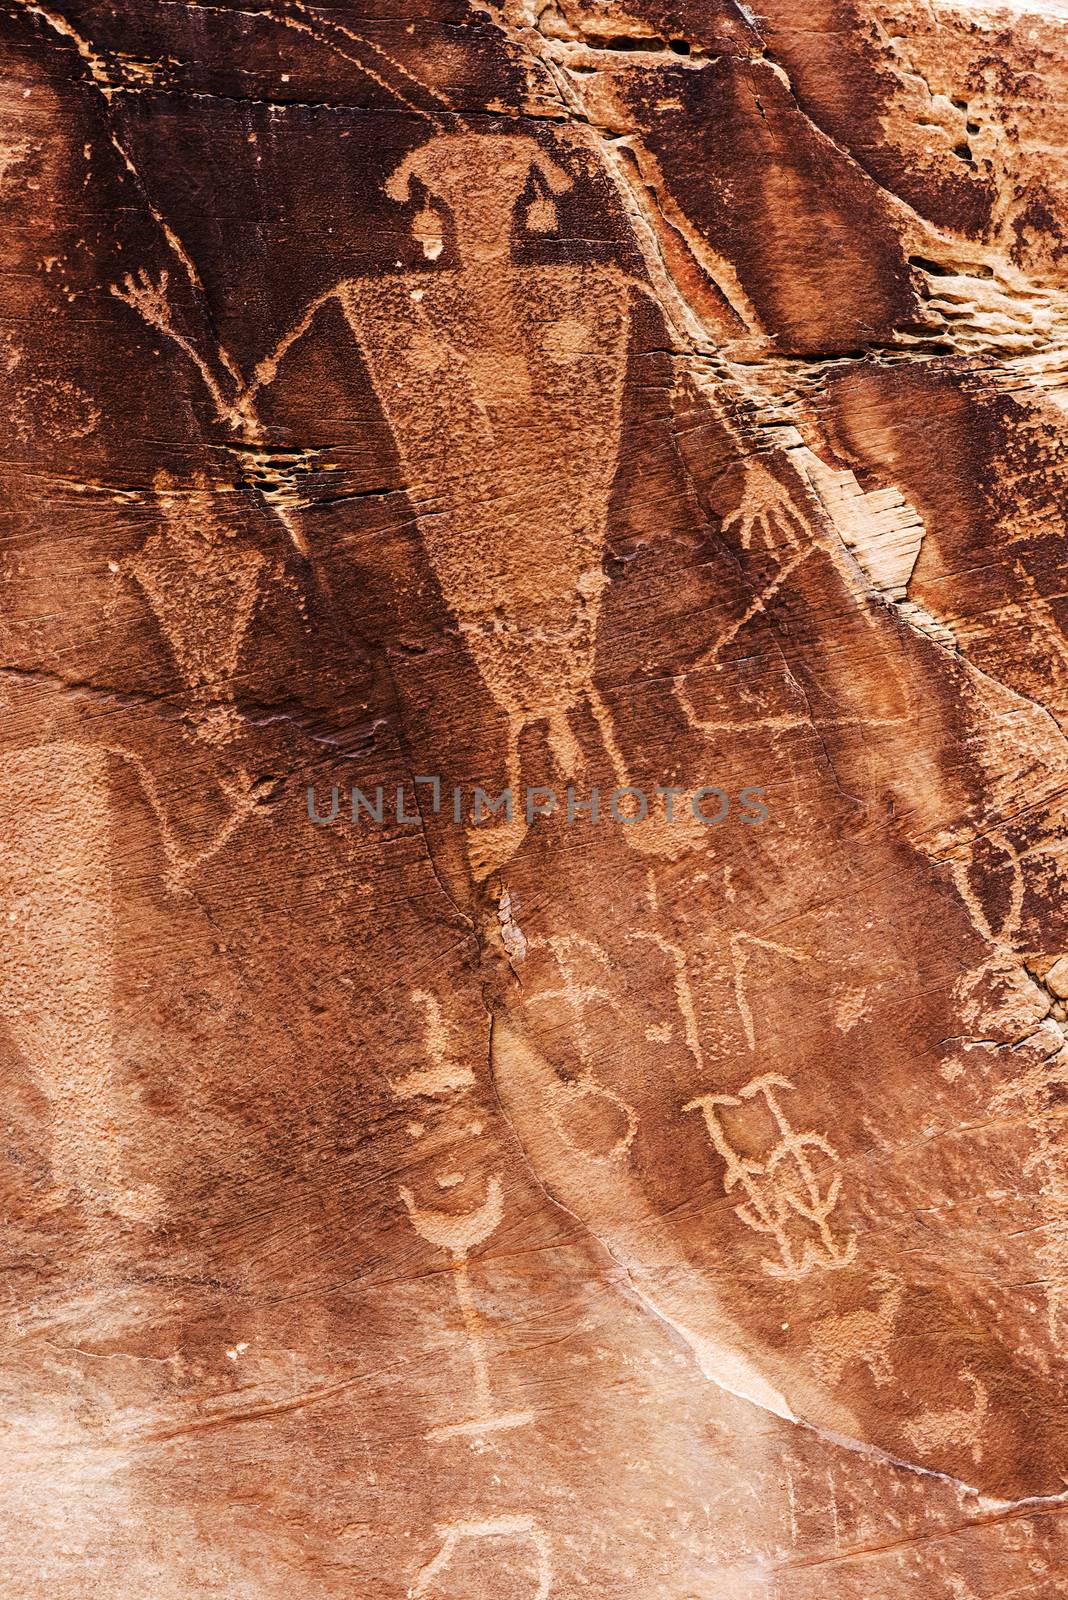 Man rock art (petroglyphs) by ancient Fremont people - native Americans - seen during hiking at Dinosaur National Monument in Utah, USA